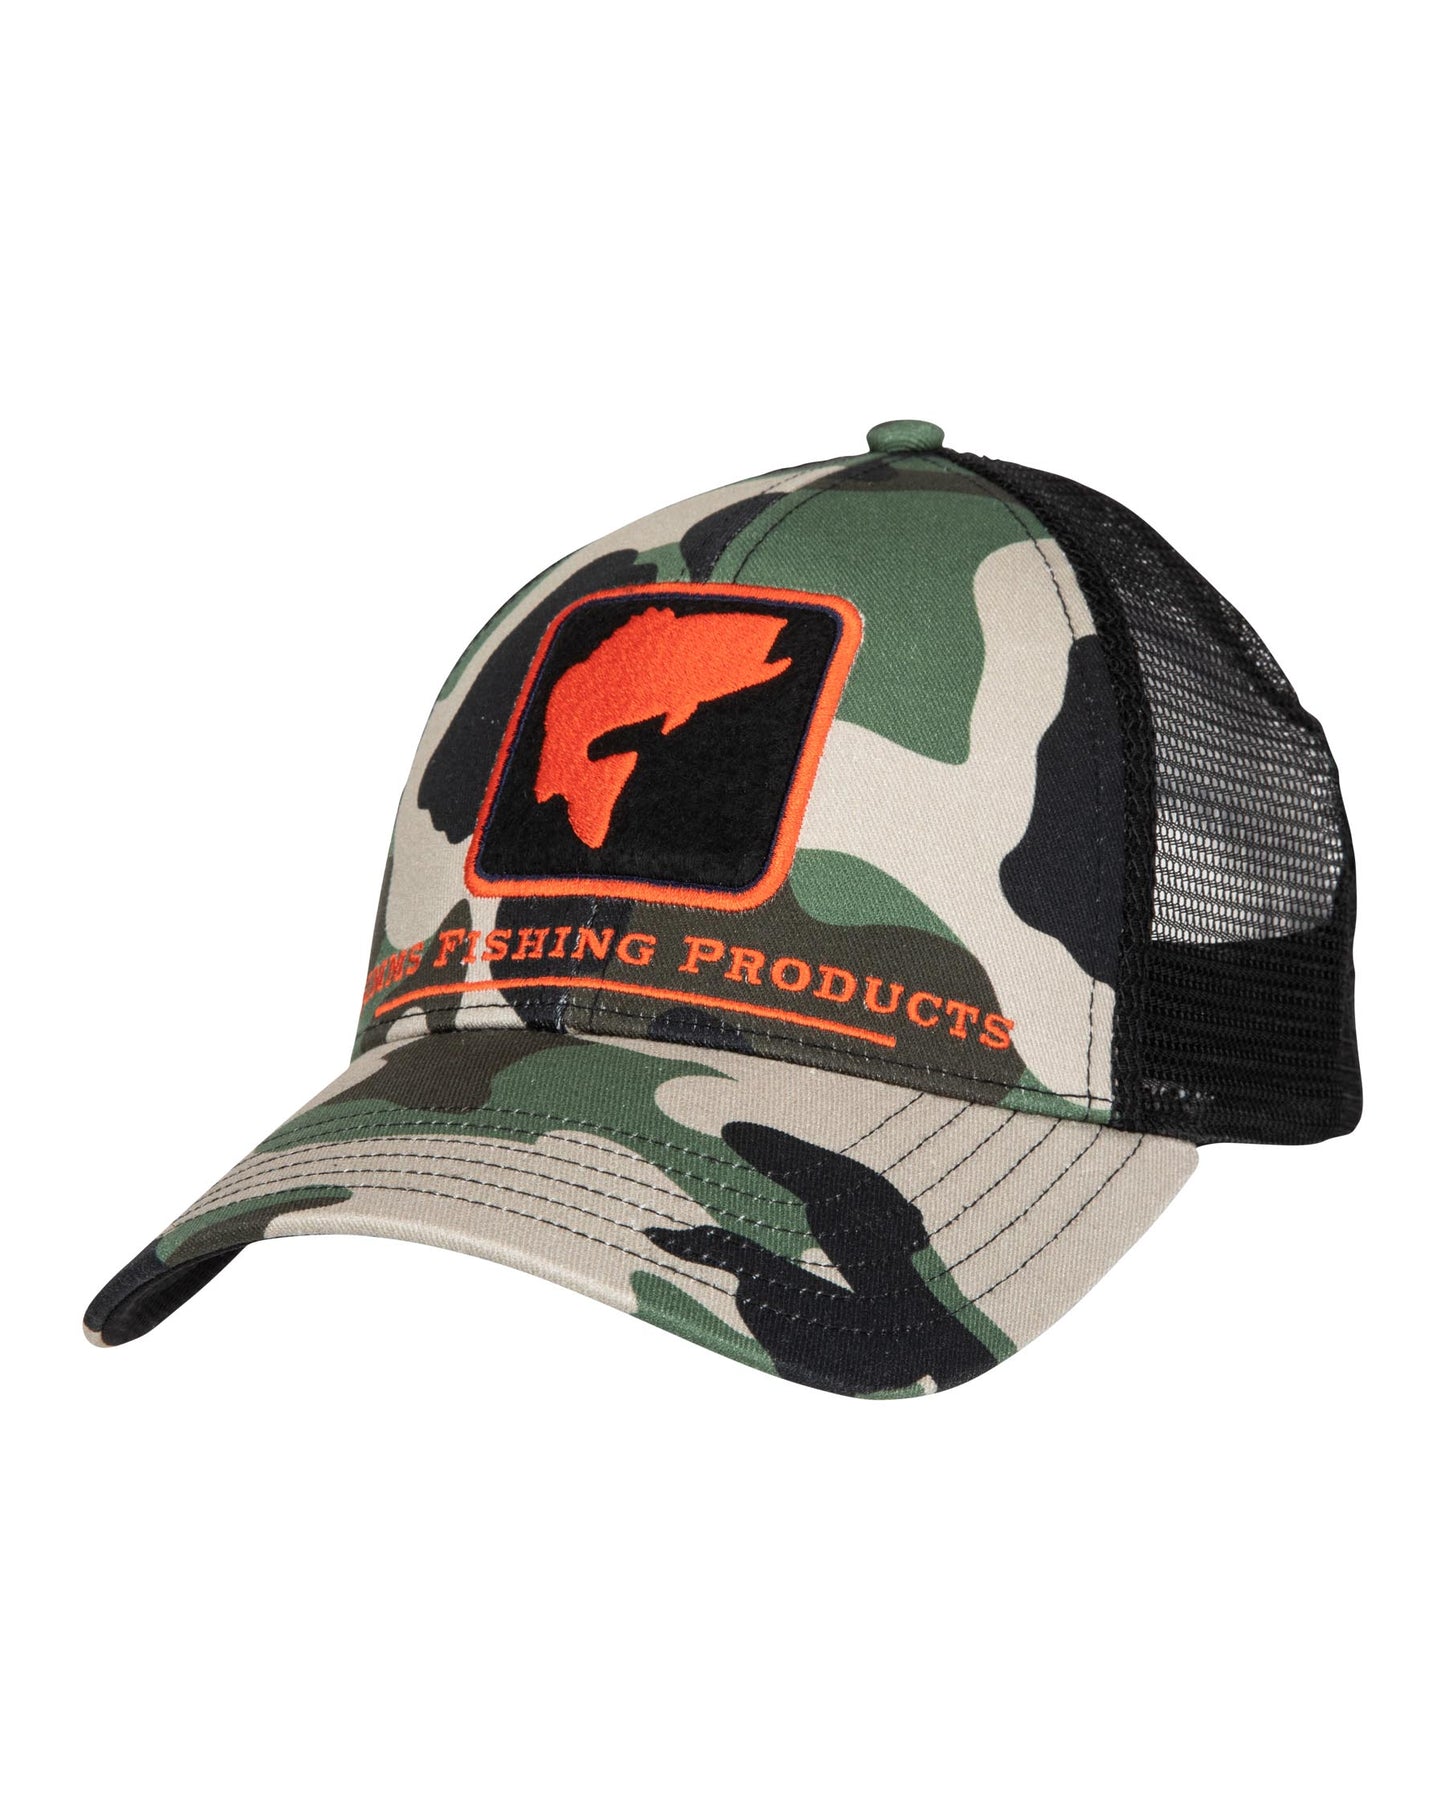 Bass Icon Trucker Hat | Simms Fishing Products